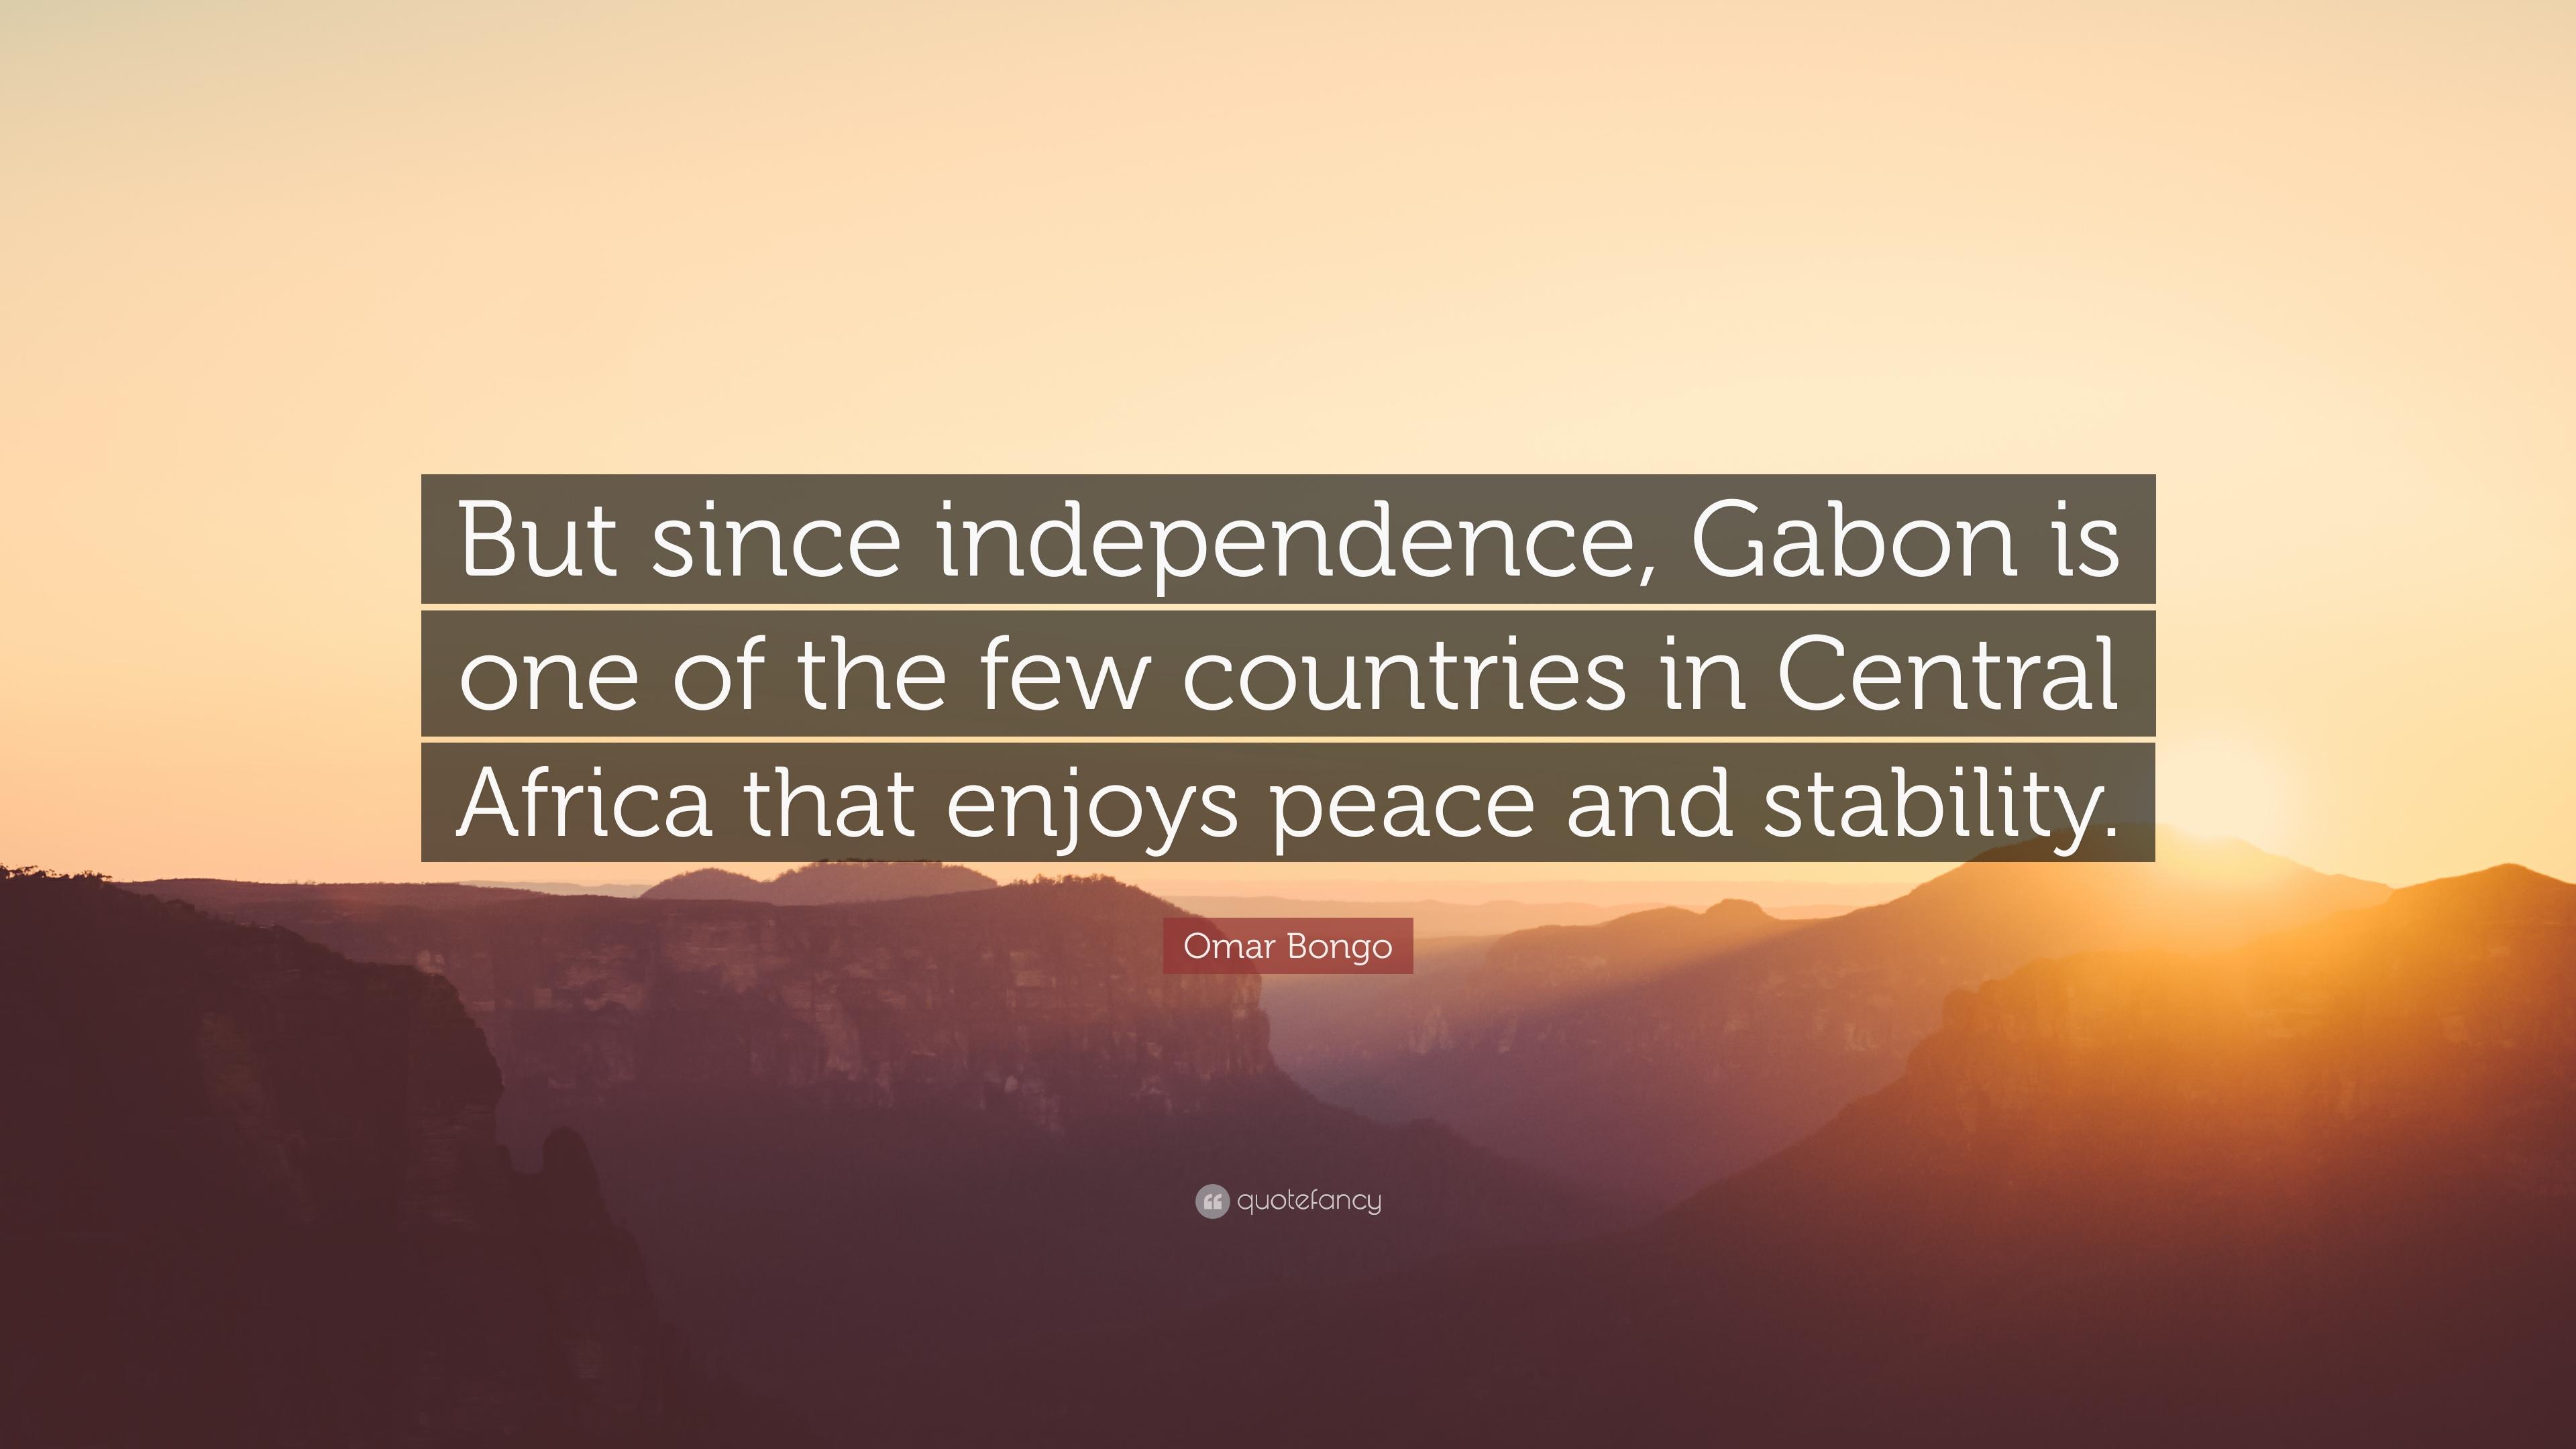 Omar Bongo Quote: “But since independence, Gabon is one of the few